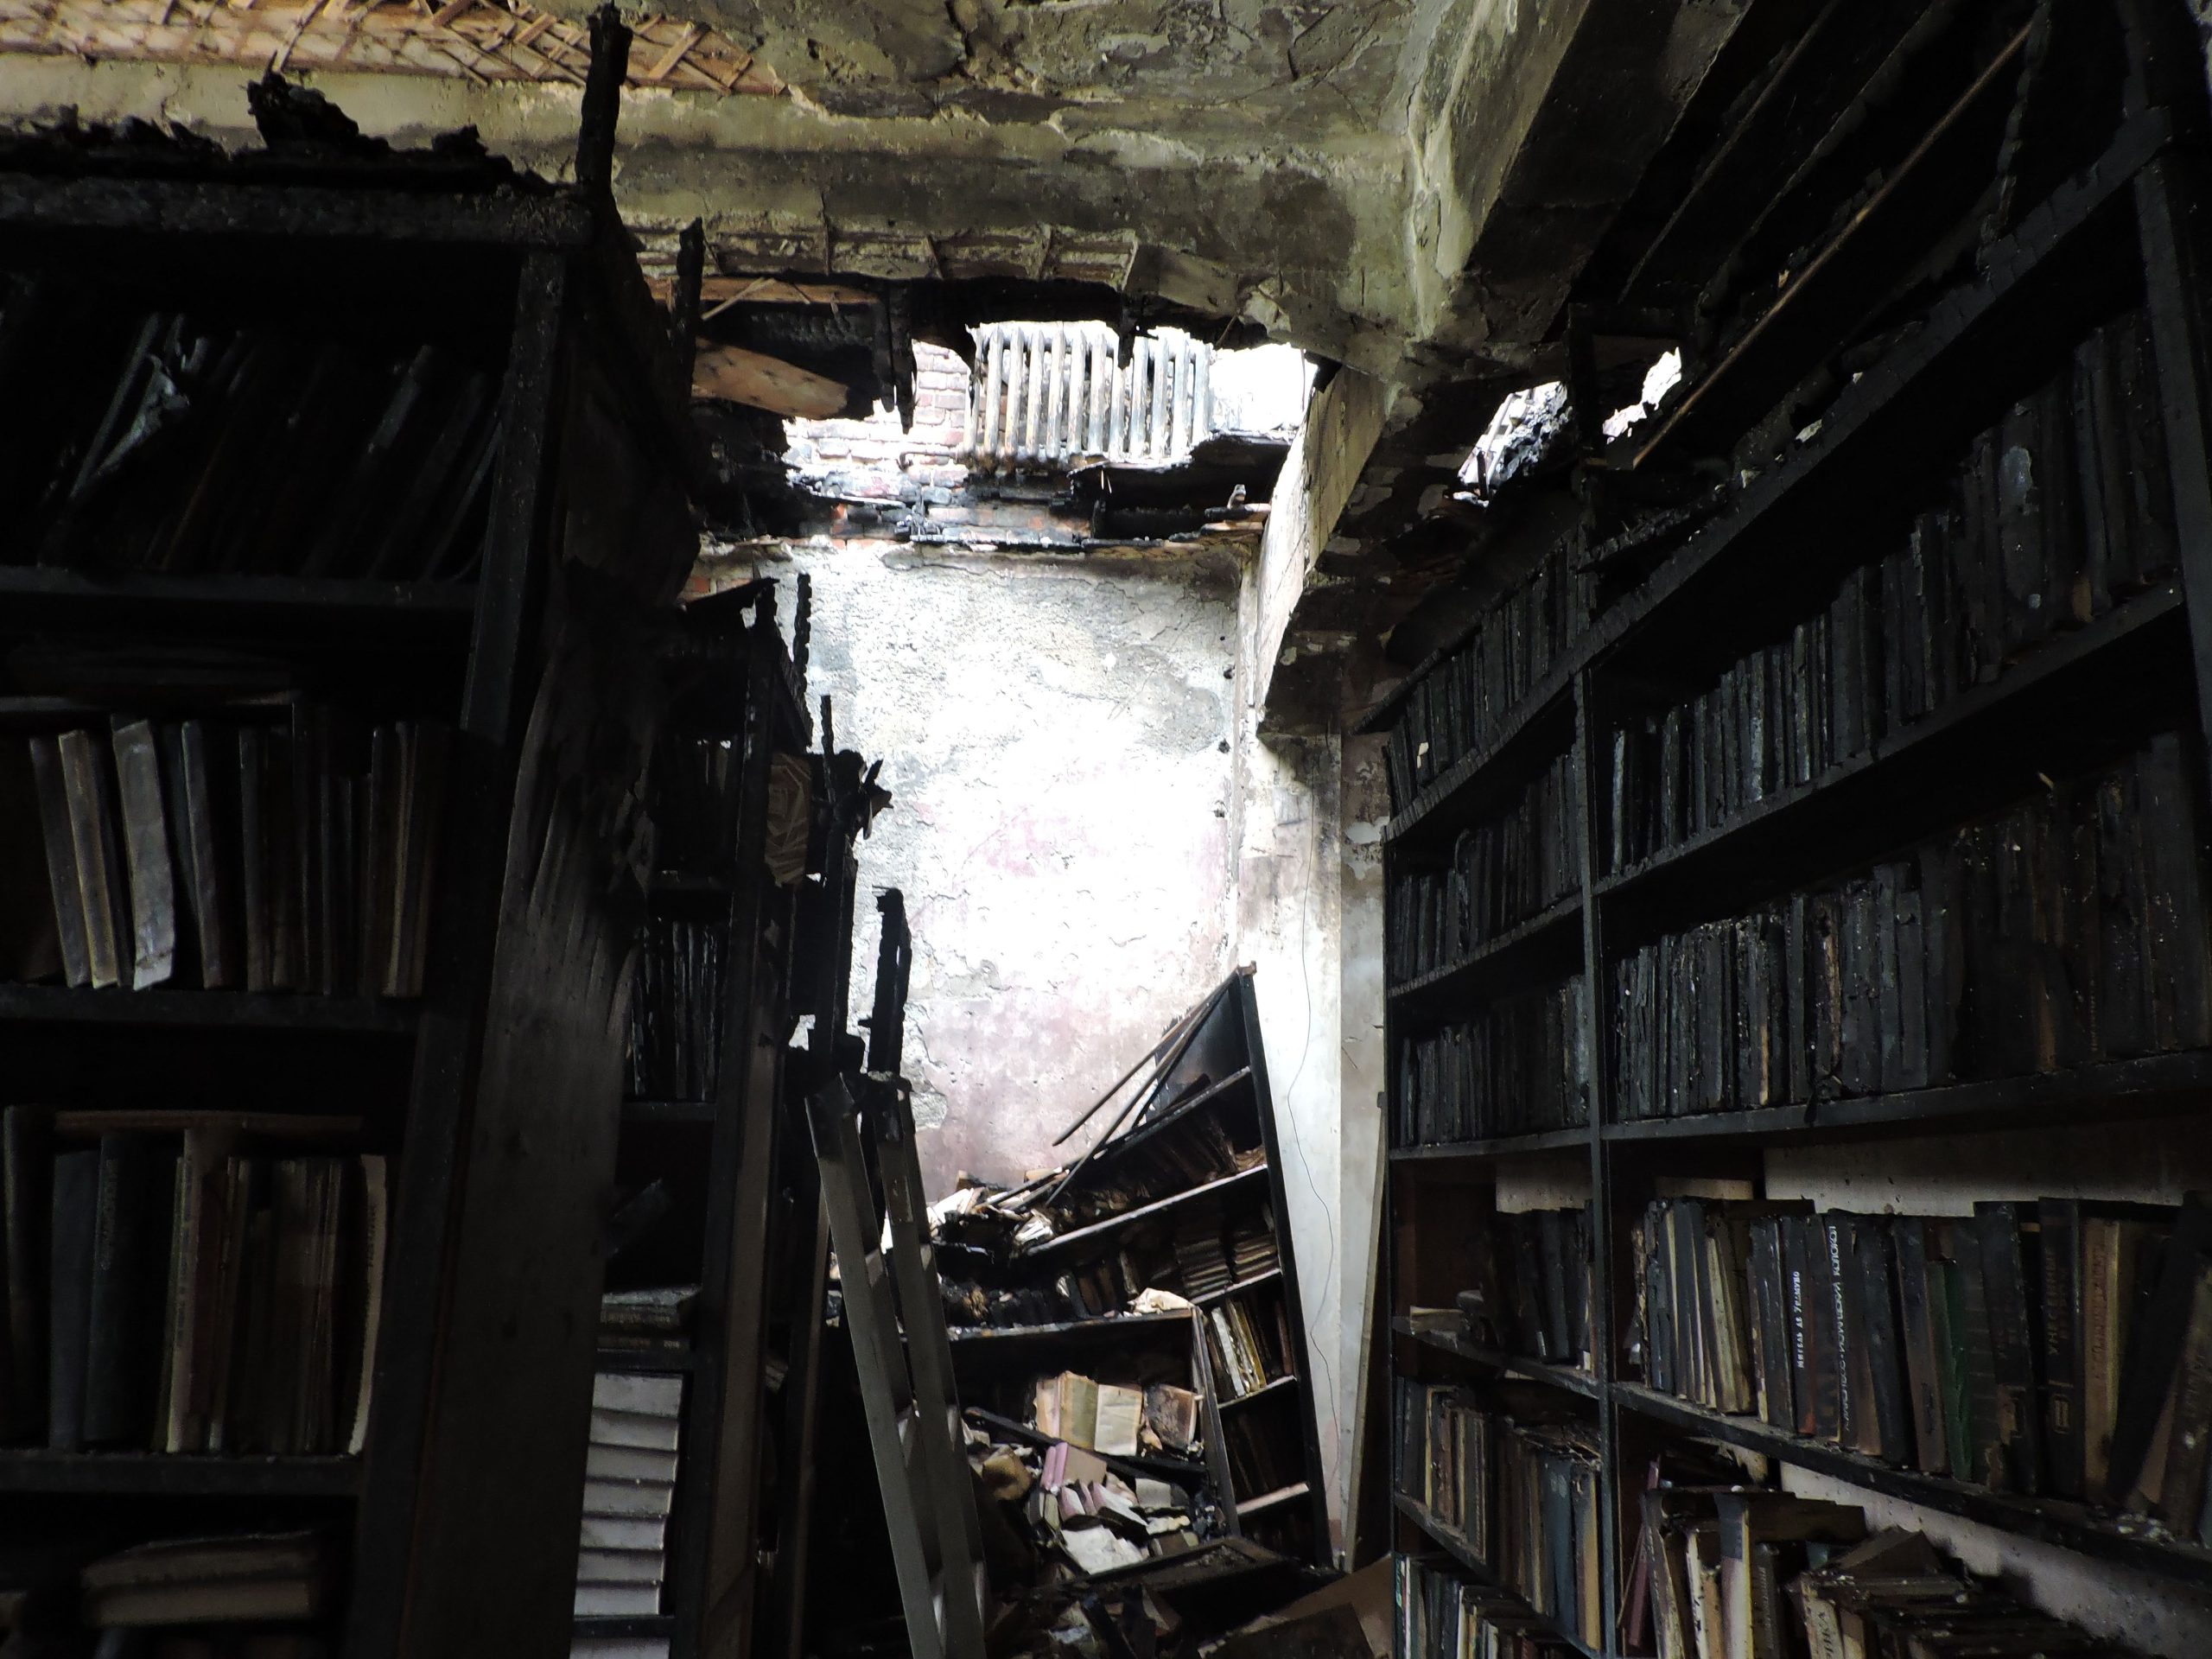 Kharkiv. A library burnt in the college destroyed on August 2, 2022, by a S-300 missile. Photo was taken on Aug 2, 2022 by Serhii Petrov.